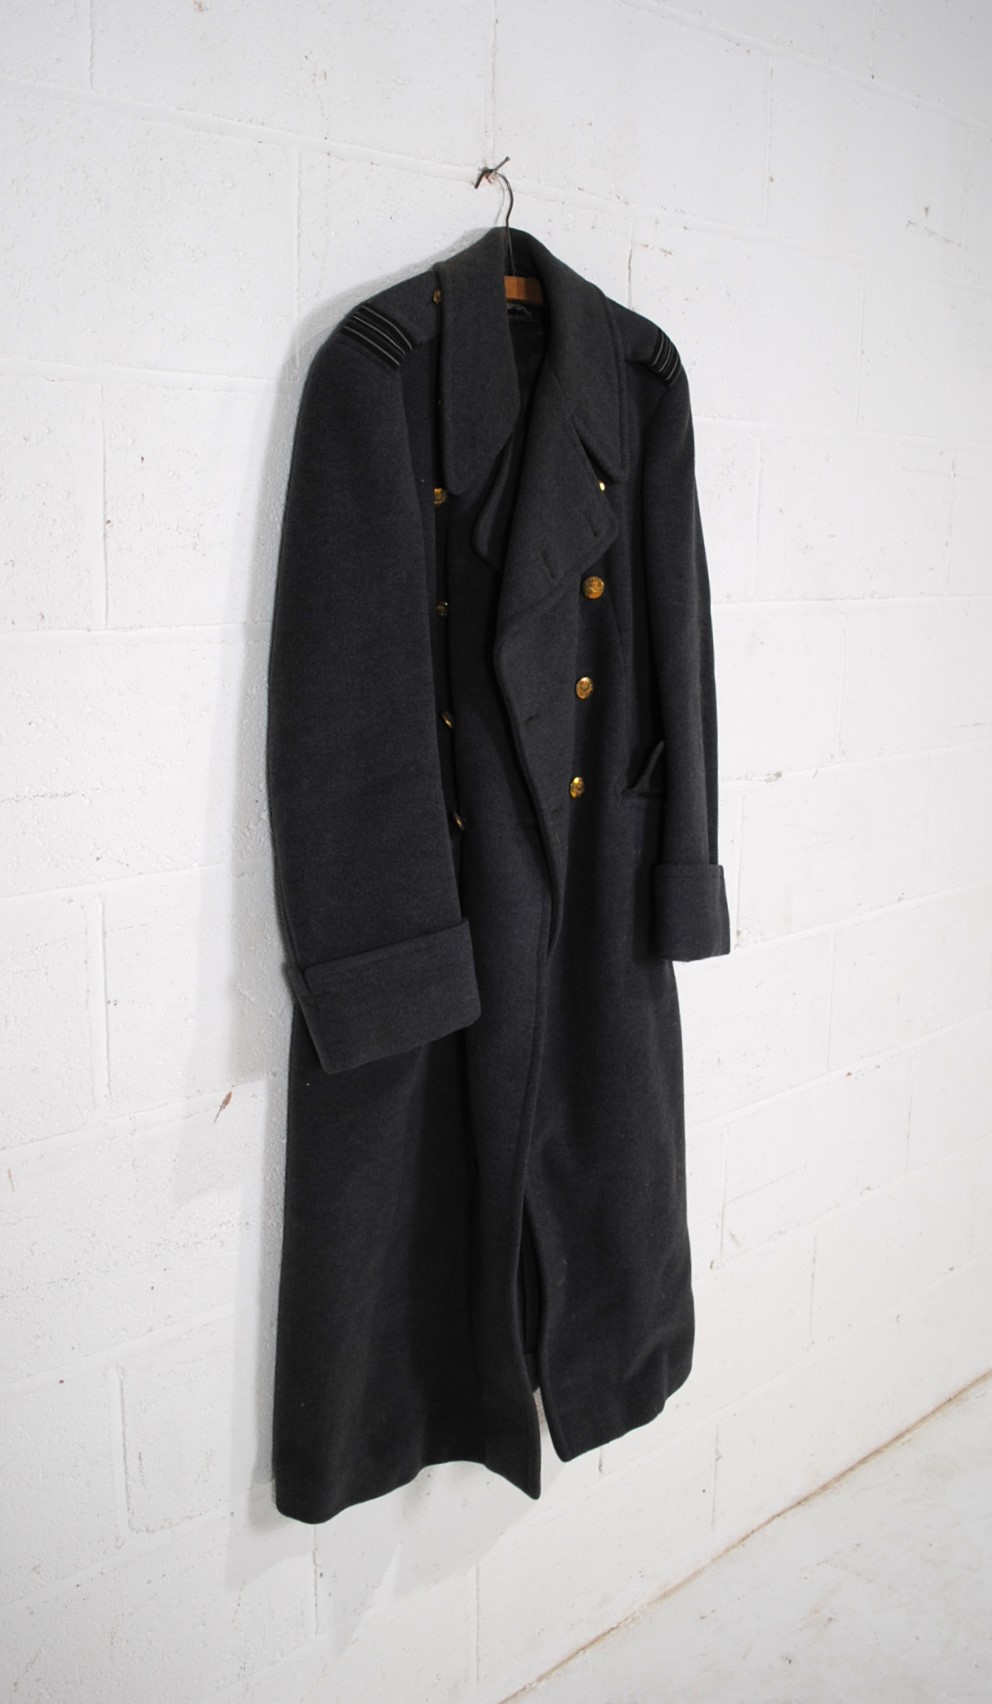 A 'Burberrys' RAF great coat - Image 3 of 6